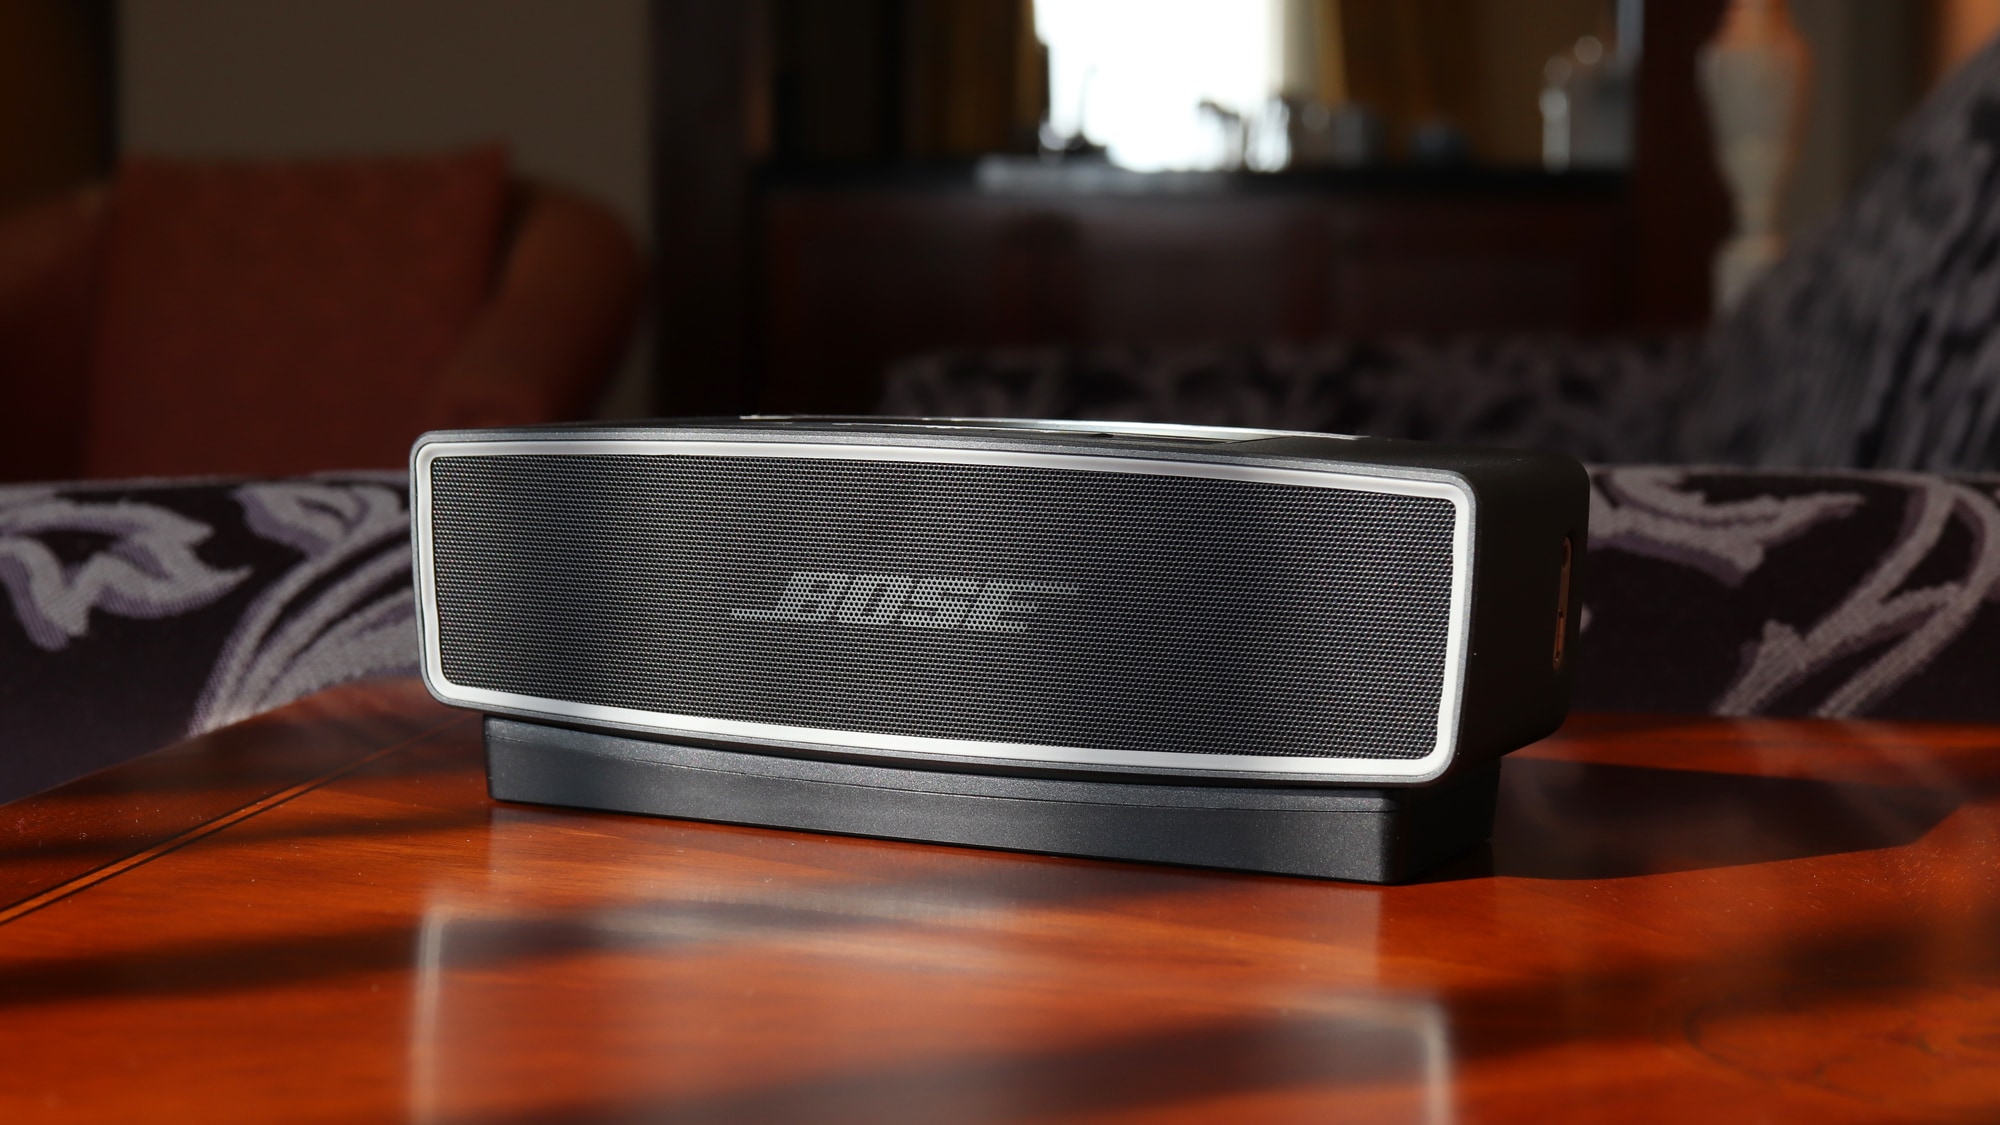 [Guest room] There is a BOSE speaker in the suite room.